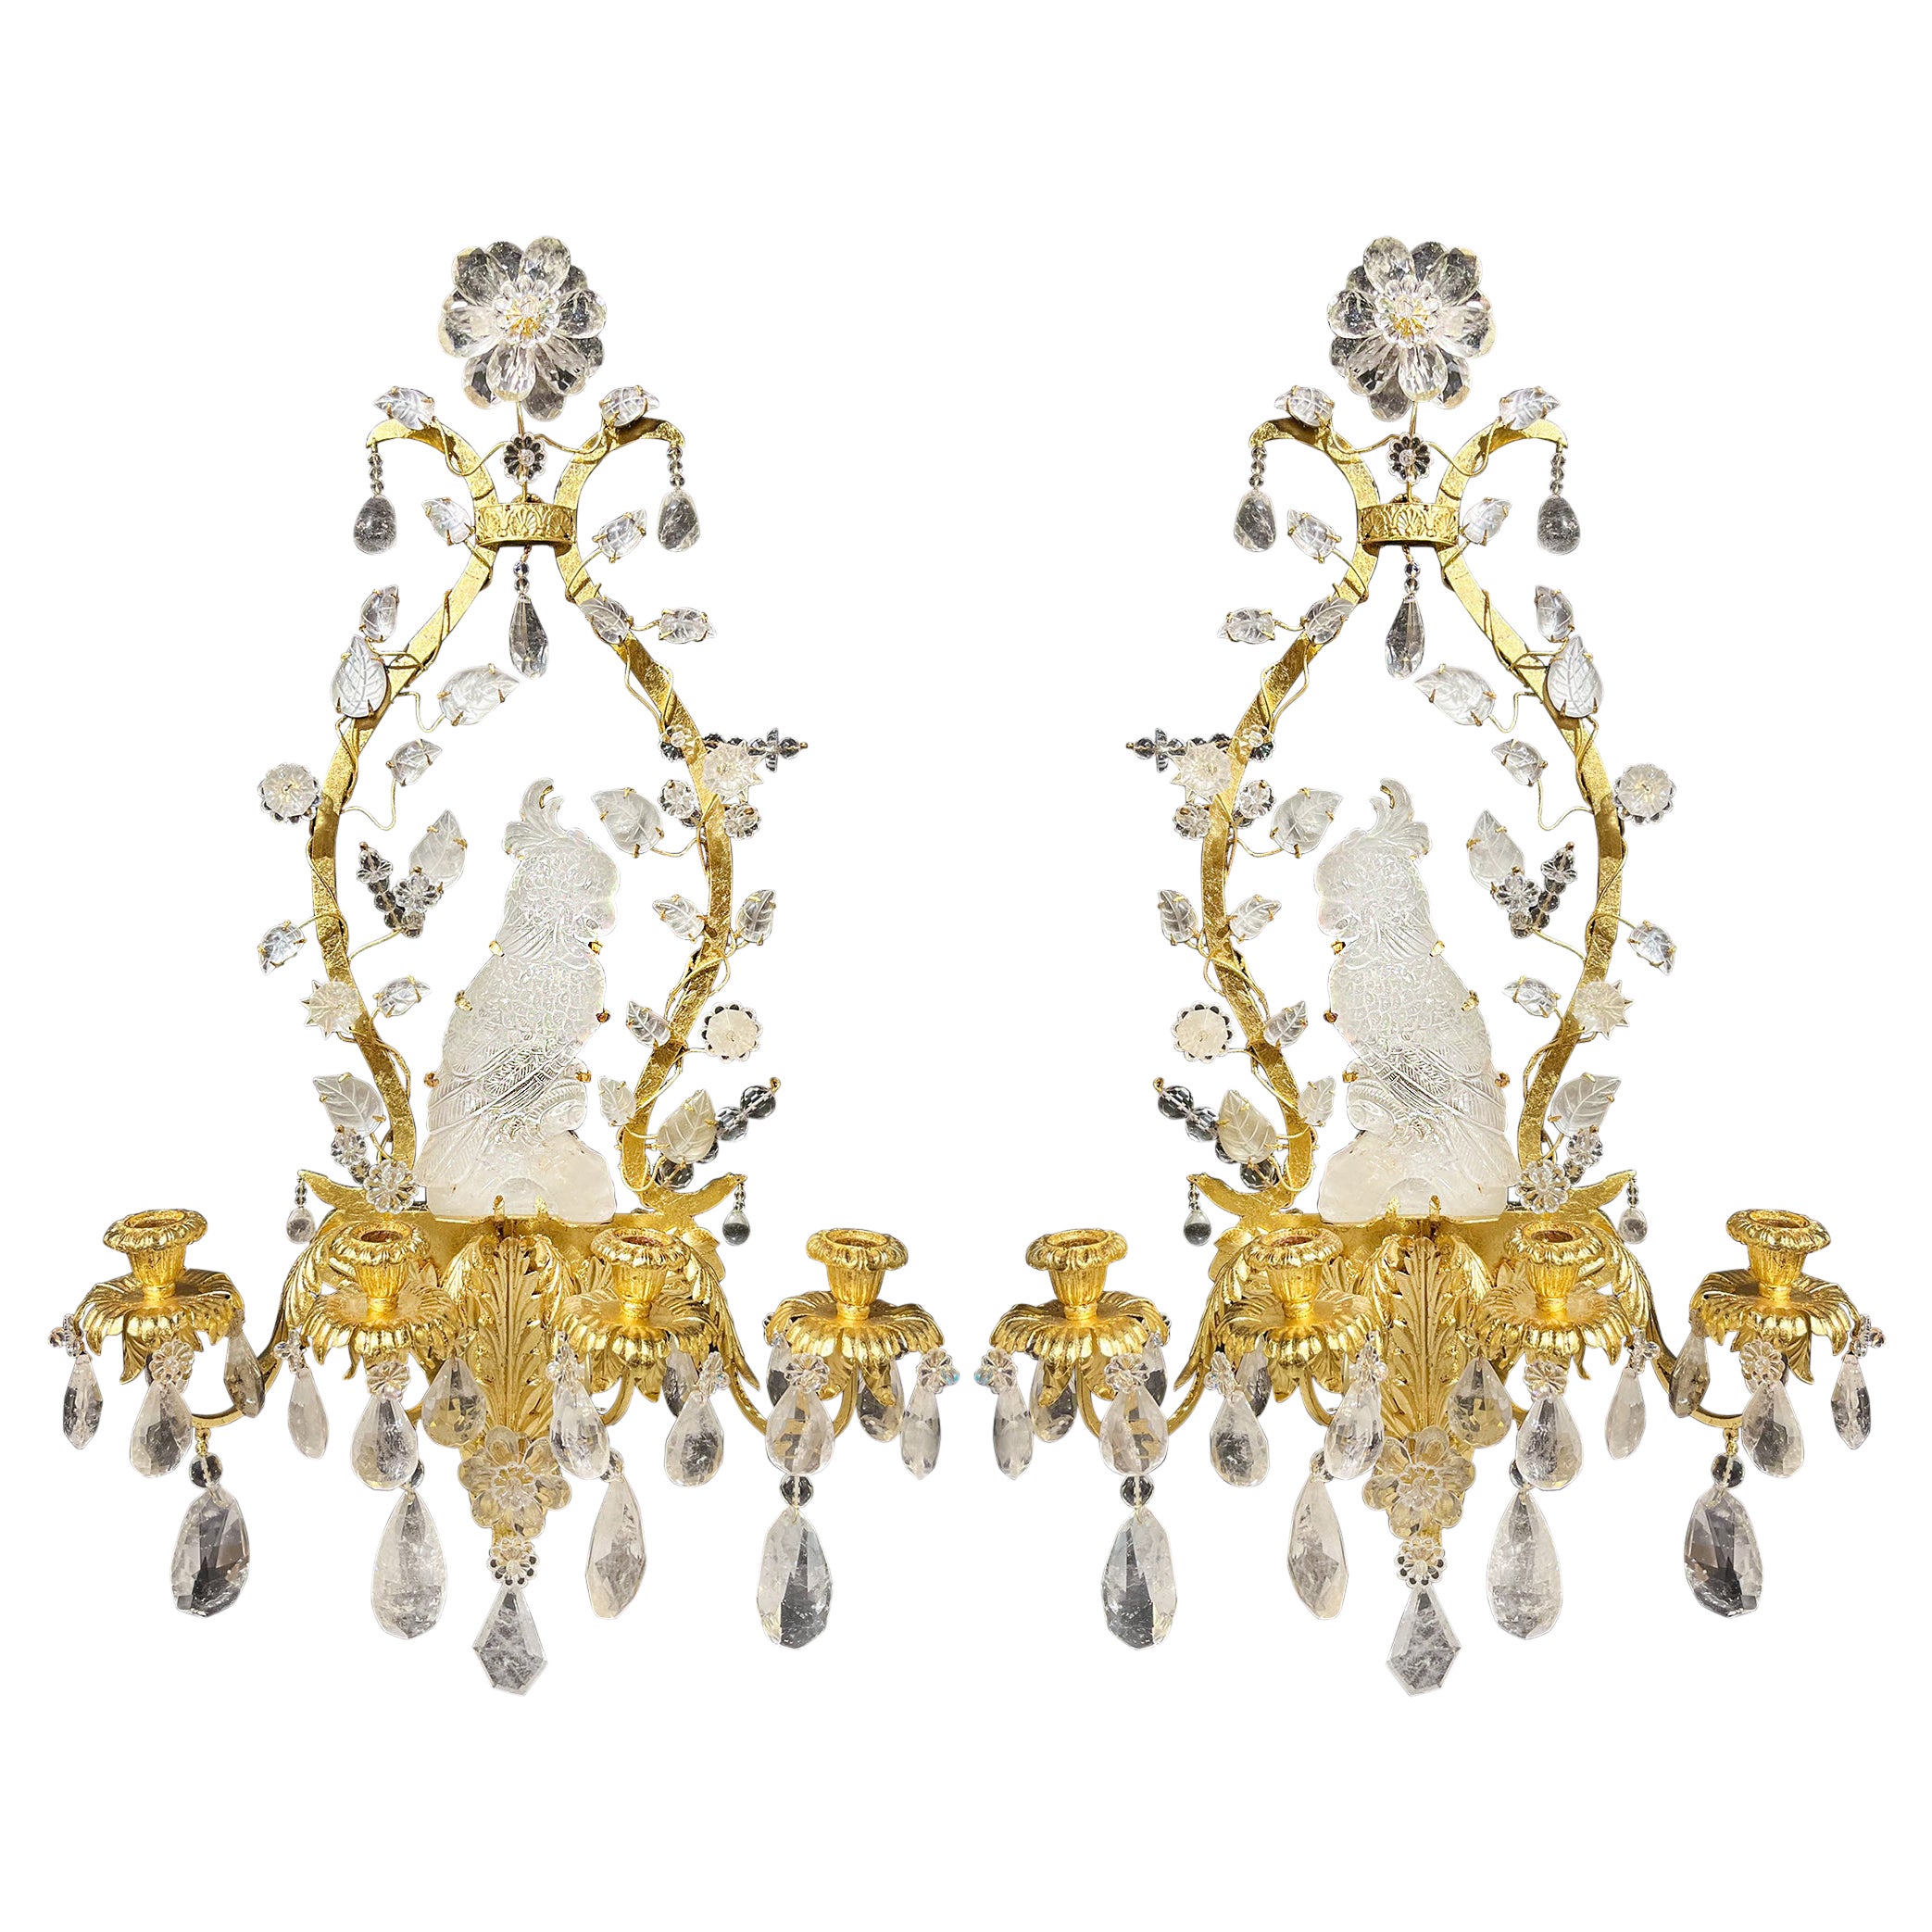 Pair of Four Light Cut Crystal and Gilt Bronze Perched Parrot Sconces